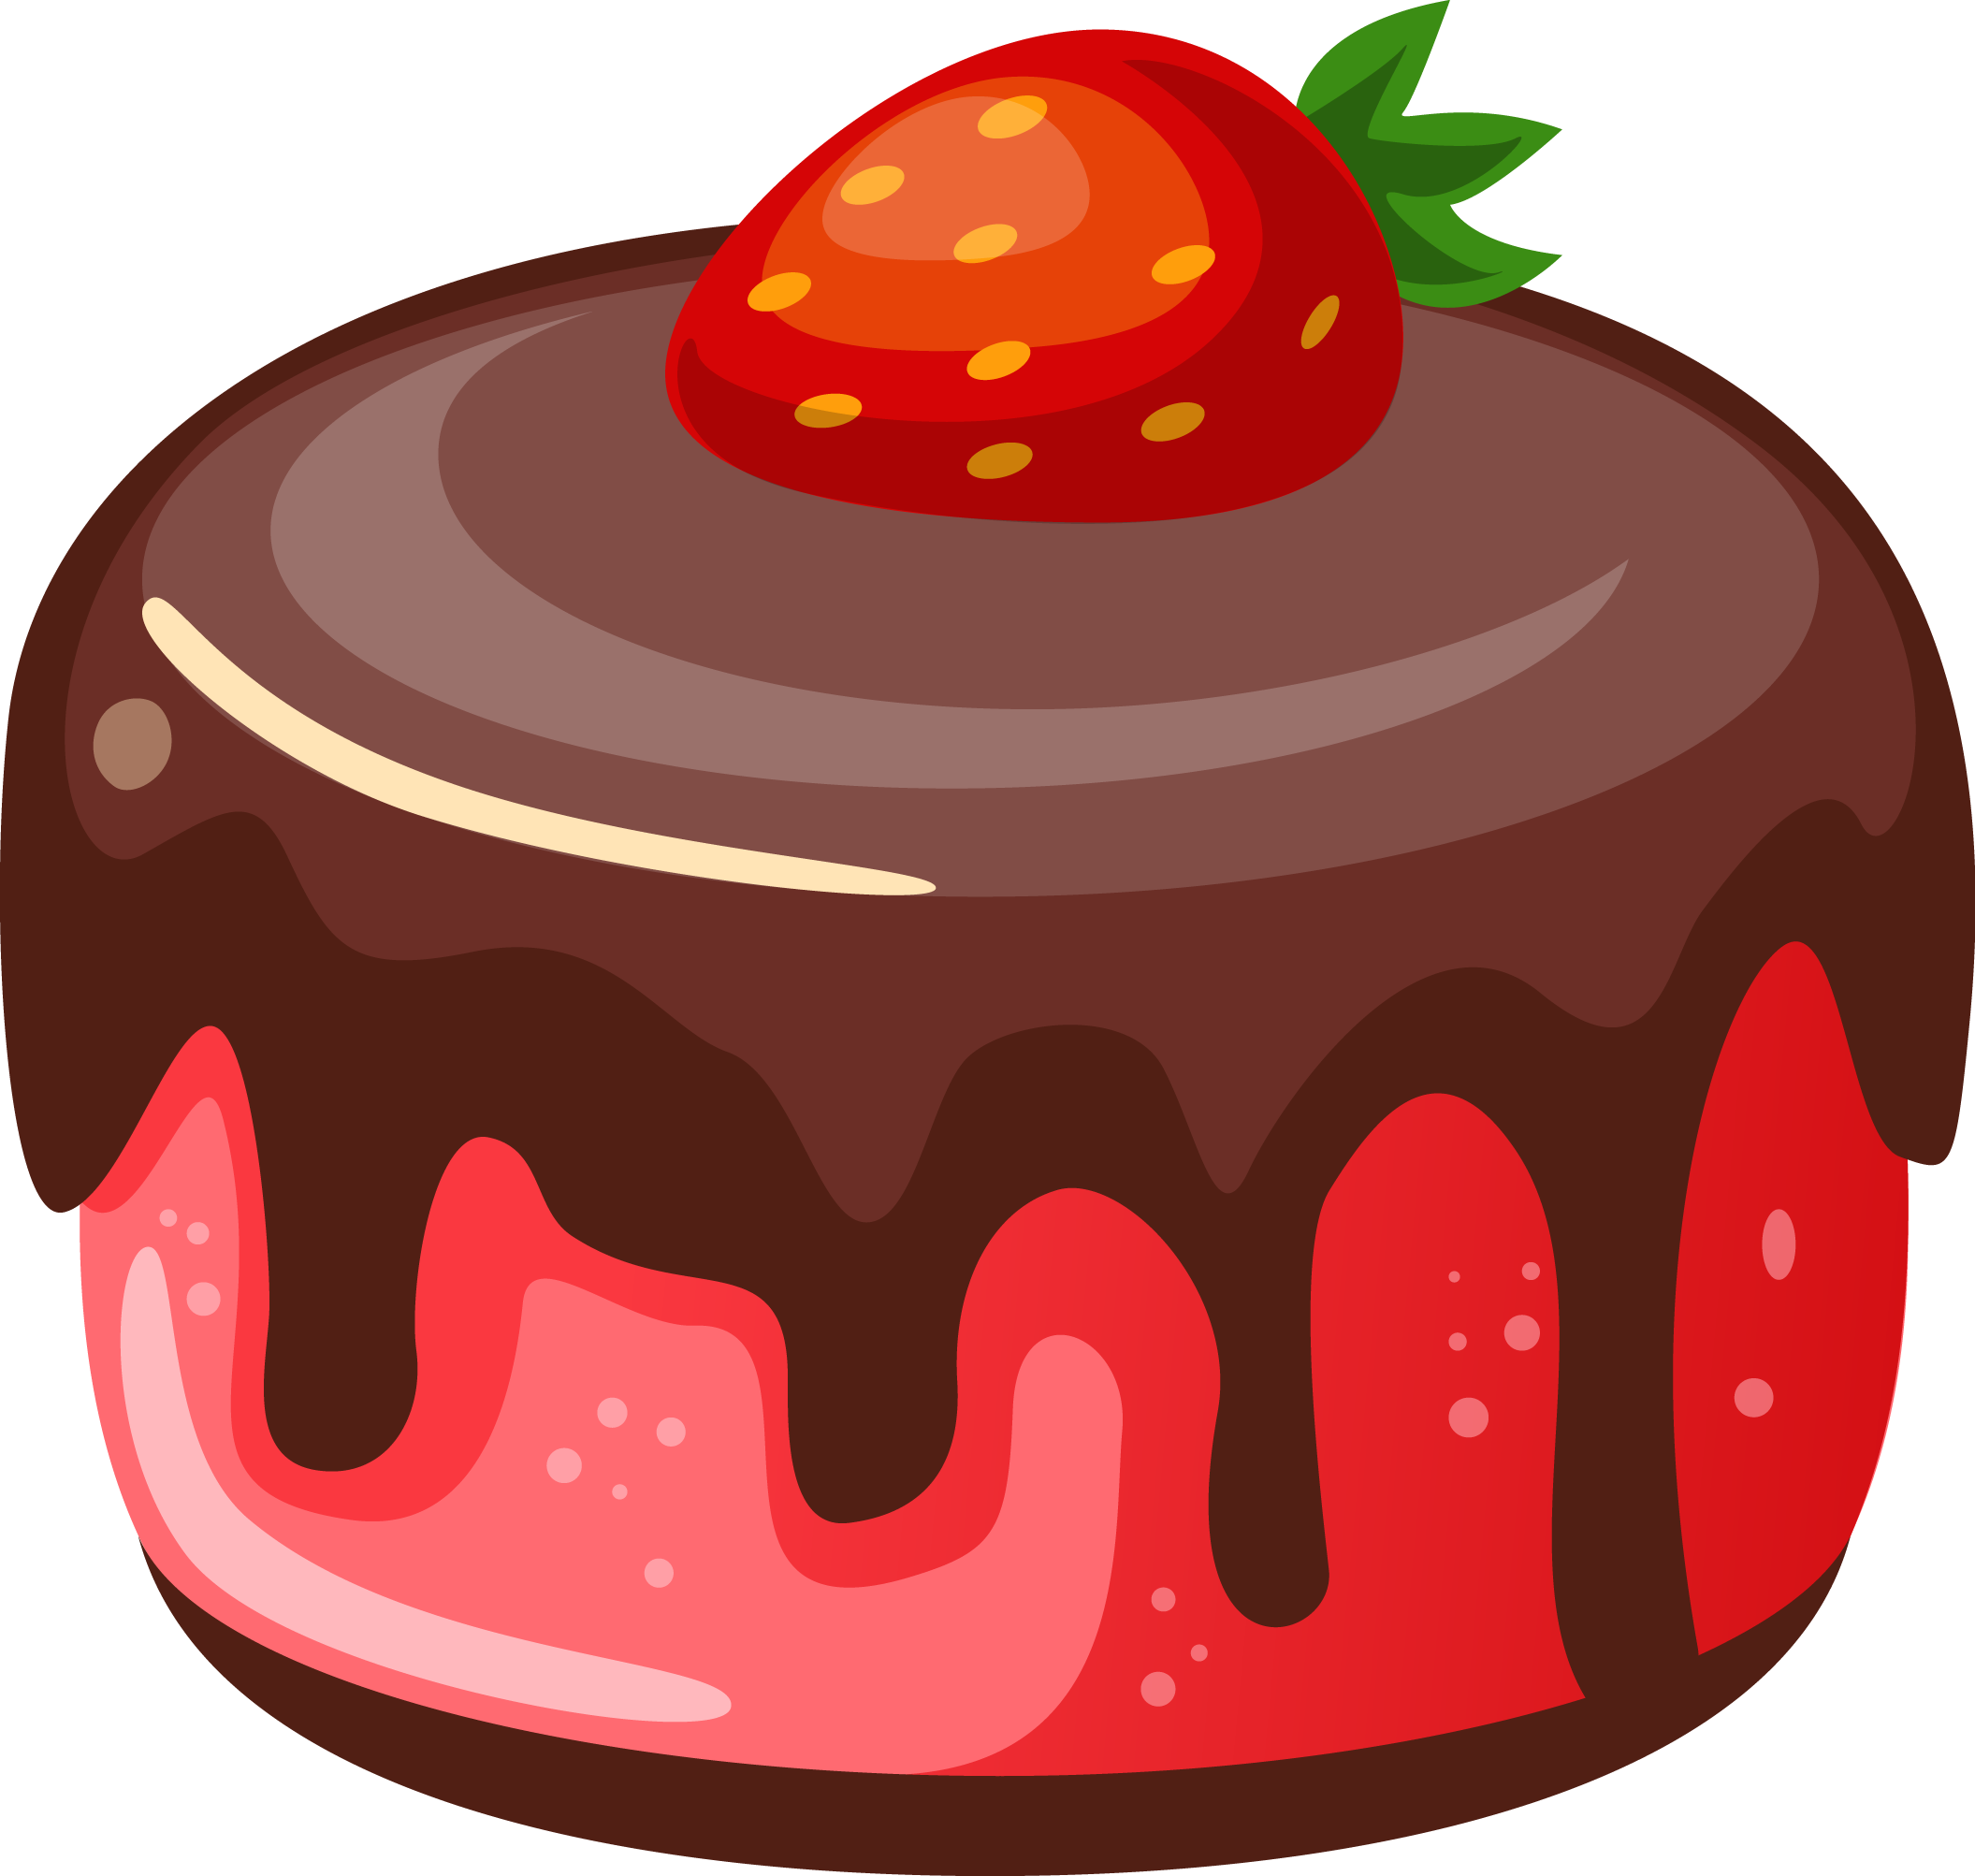 Cake Diet Pudding - Puding Stawberry Png, Transparent Png